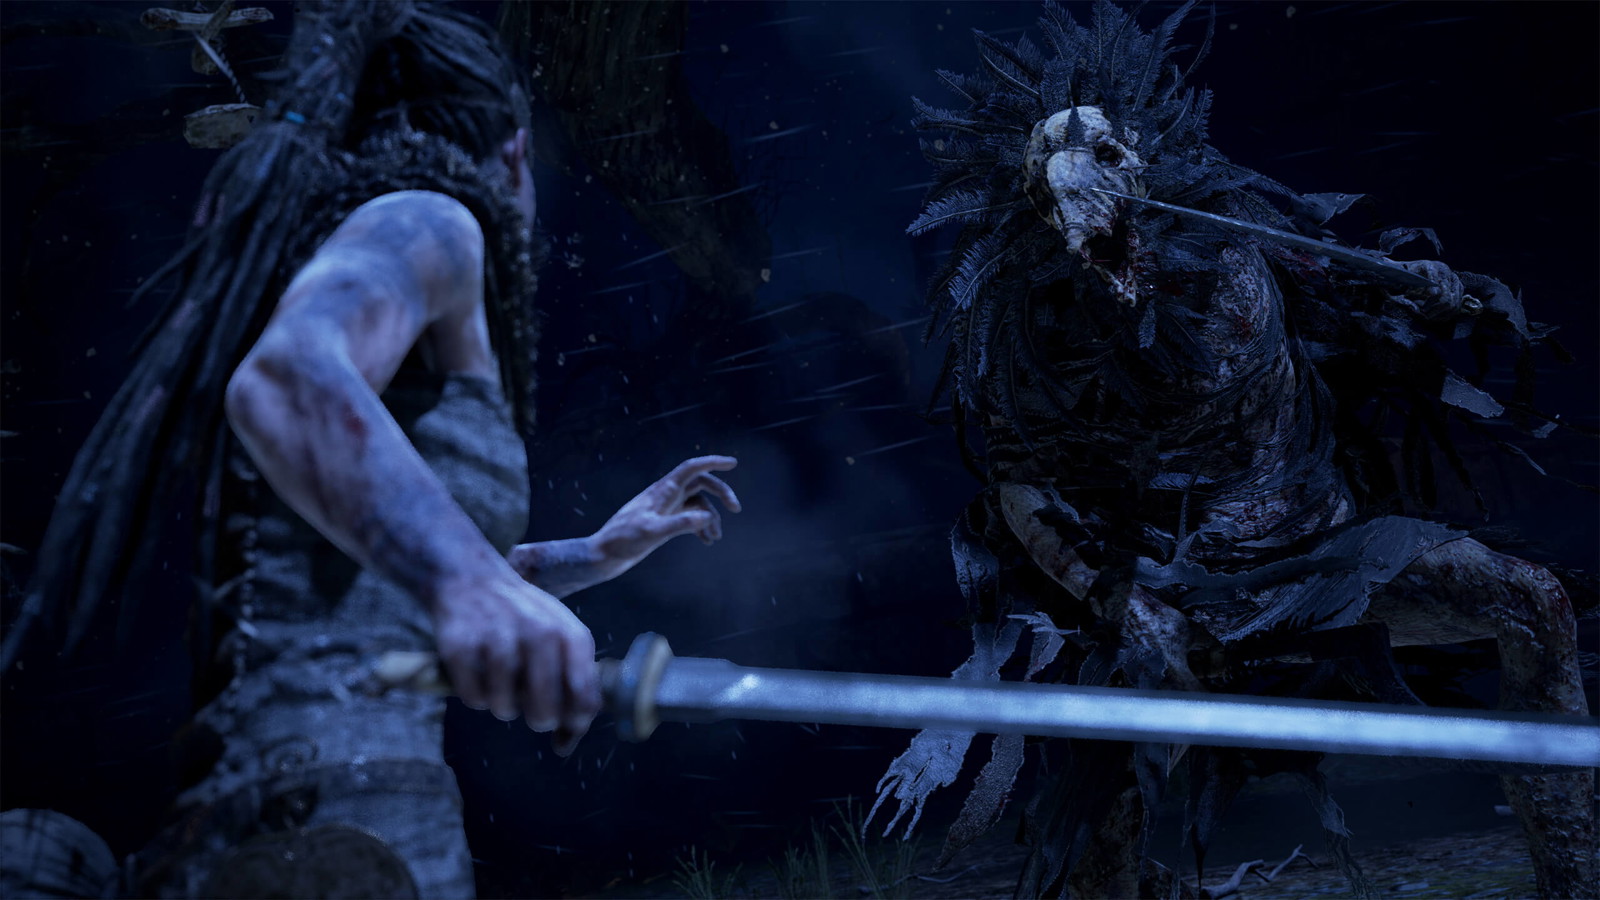 Hellblade Senua's Sacrifice deals with a lot more than what's on the surface.